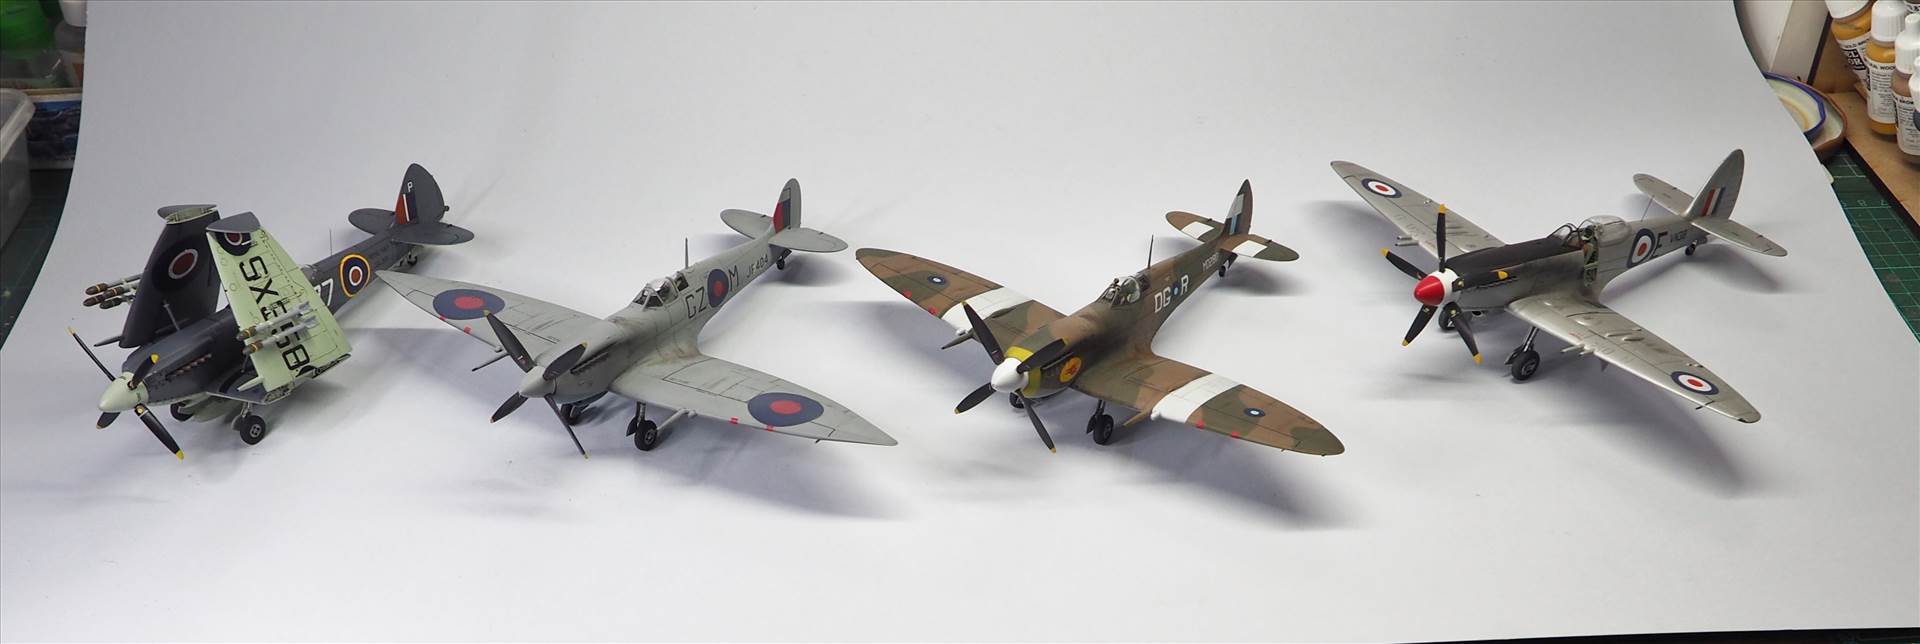 1 48th Spitfires.JPG  by ajeaton65